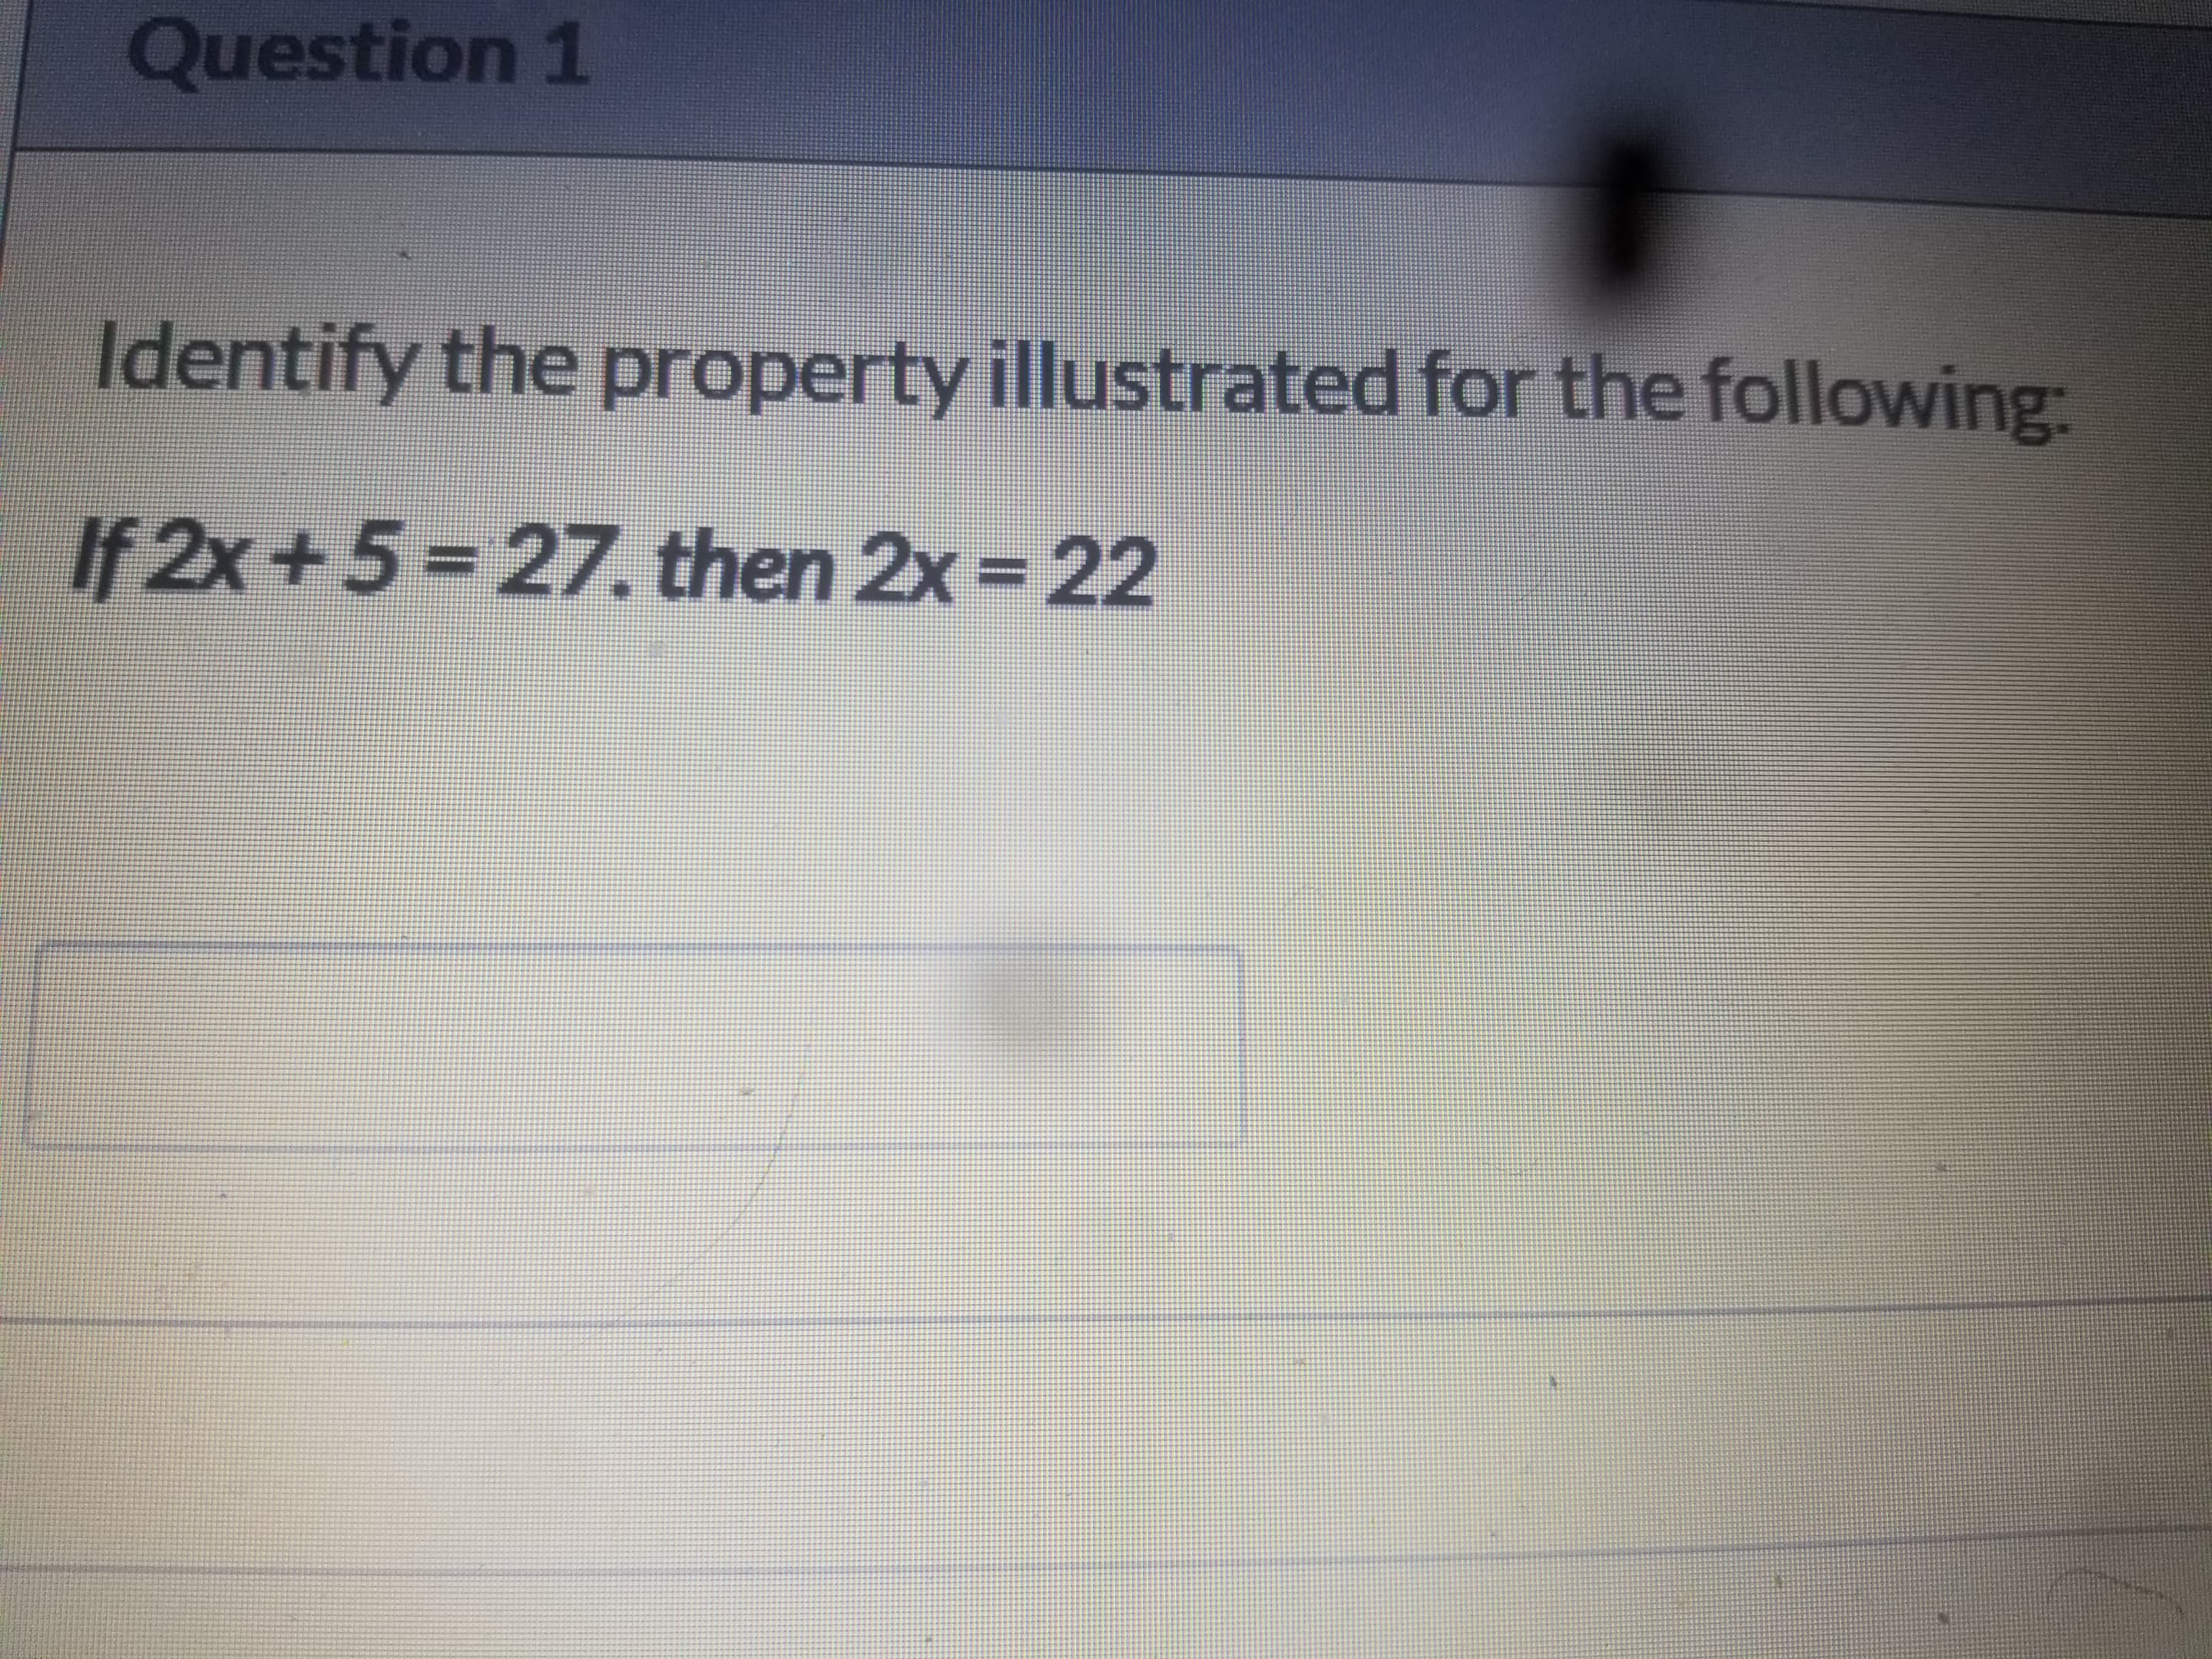 Identify the property illustrated for the following:
If 2x+5=27. then 2x = 22
